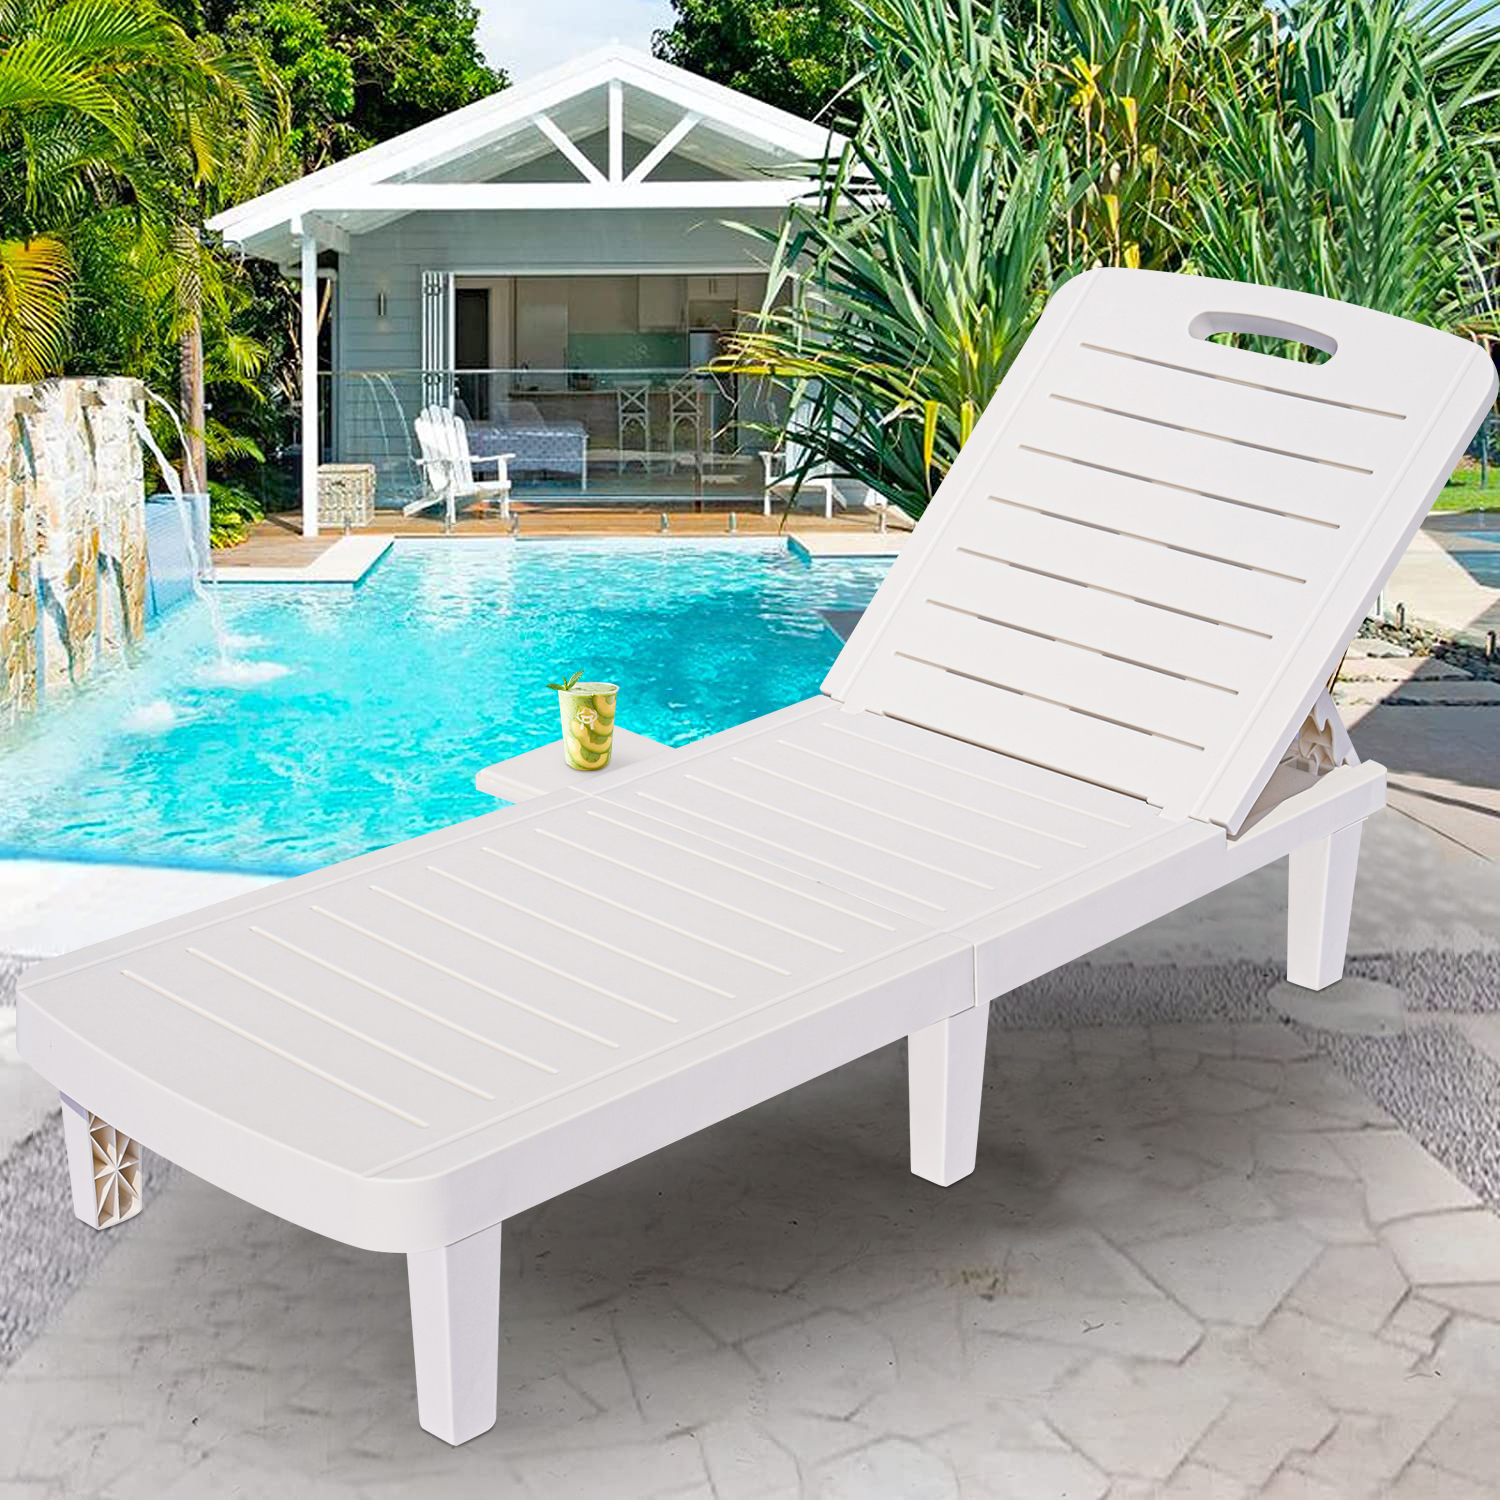 Chaise Lounge for Beach, Patio Furniture Single Outdoor Chaise Lounge Chair with Adjustable Backrest/Retractable Tray, Plastic Reclining Lounge Chair for Backyard, Porch, Pool, Max Holds 330LBS, L4555 - image 1 of 9